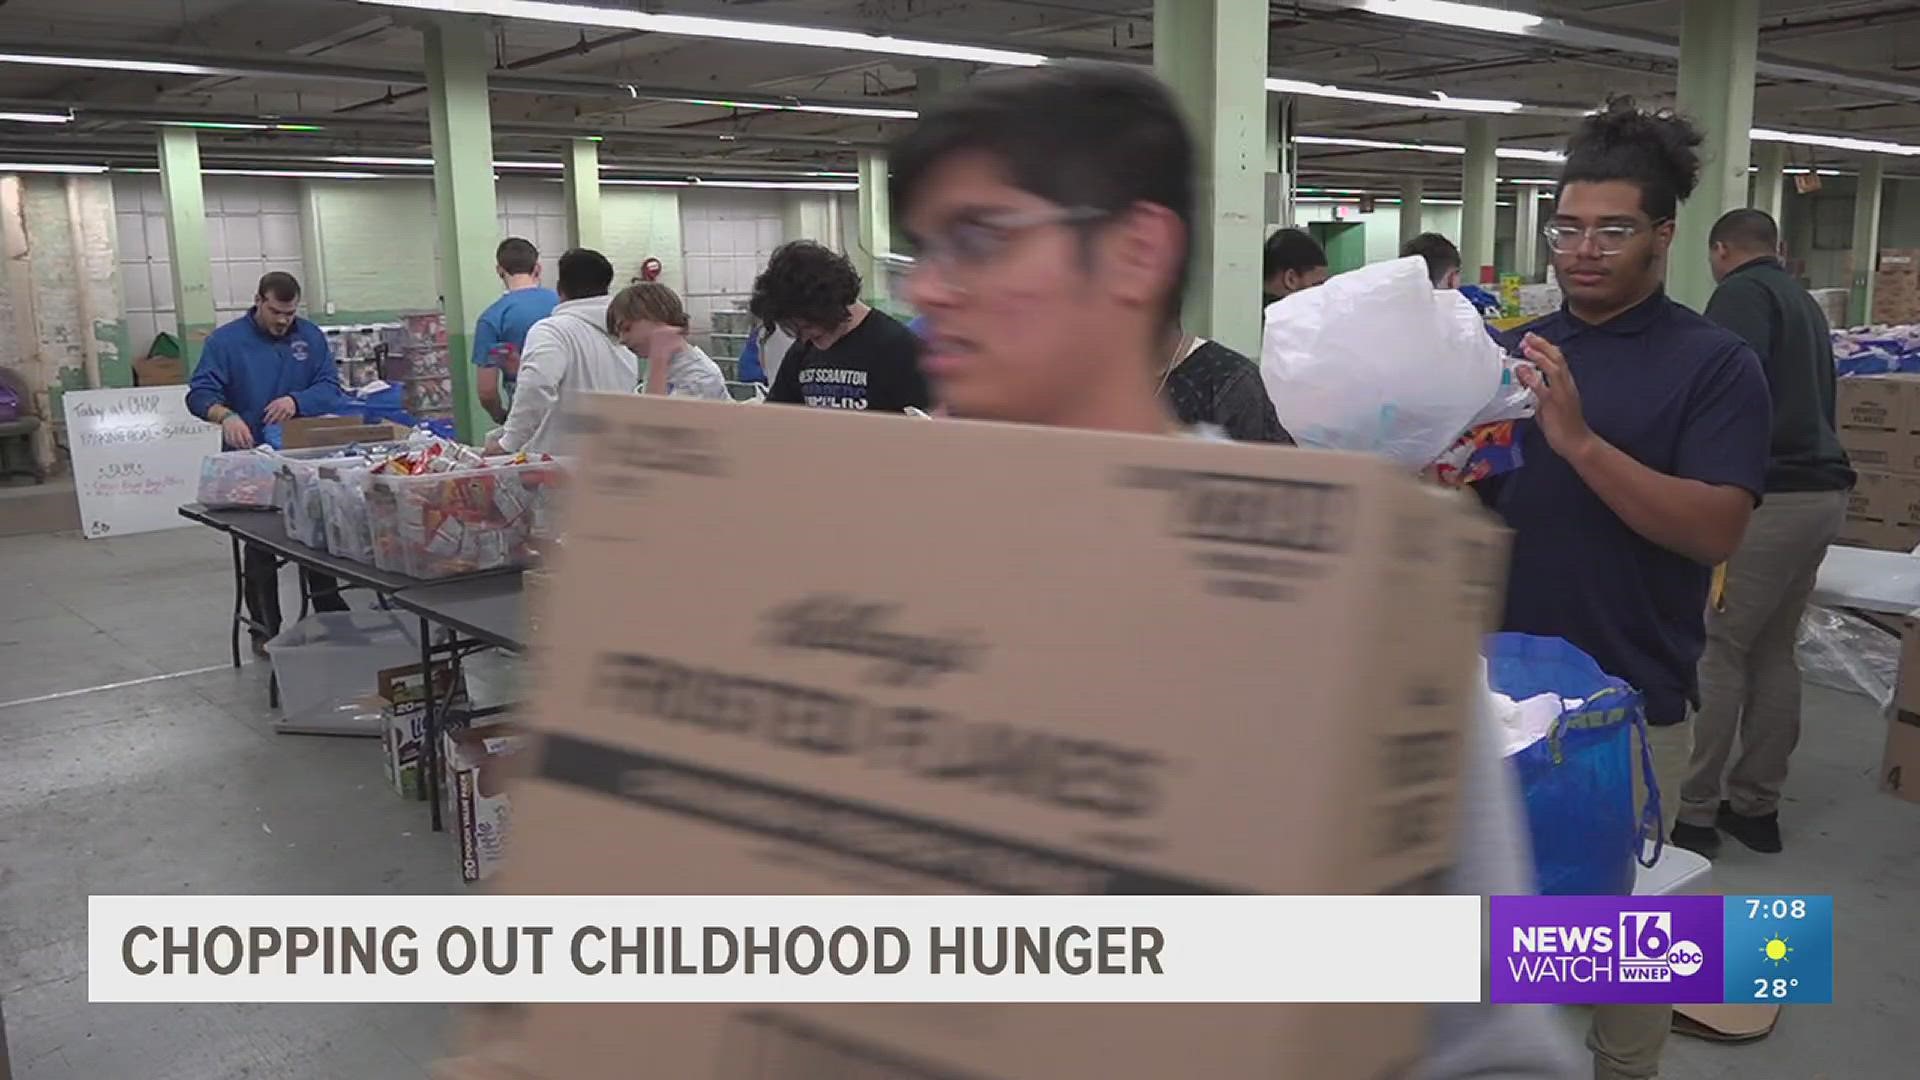 The non-profit's new location in Scranton was handing out meals to those in need Wednesday.